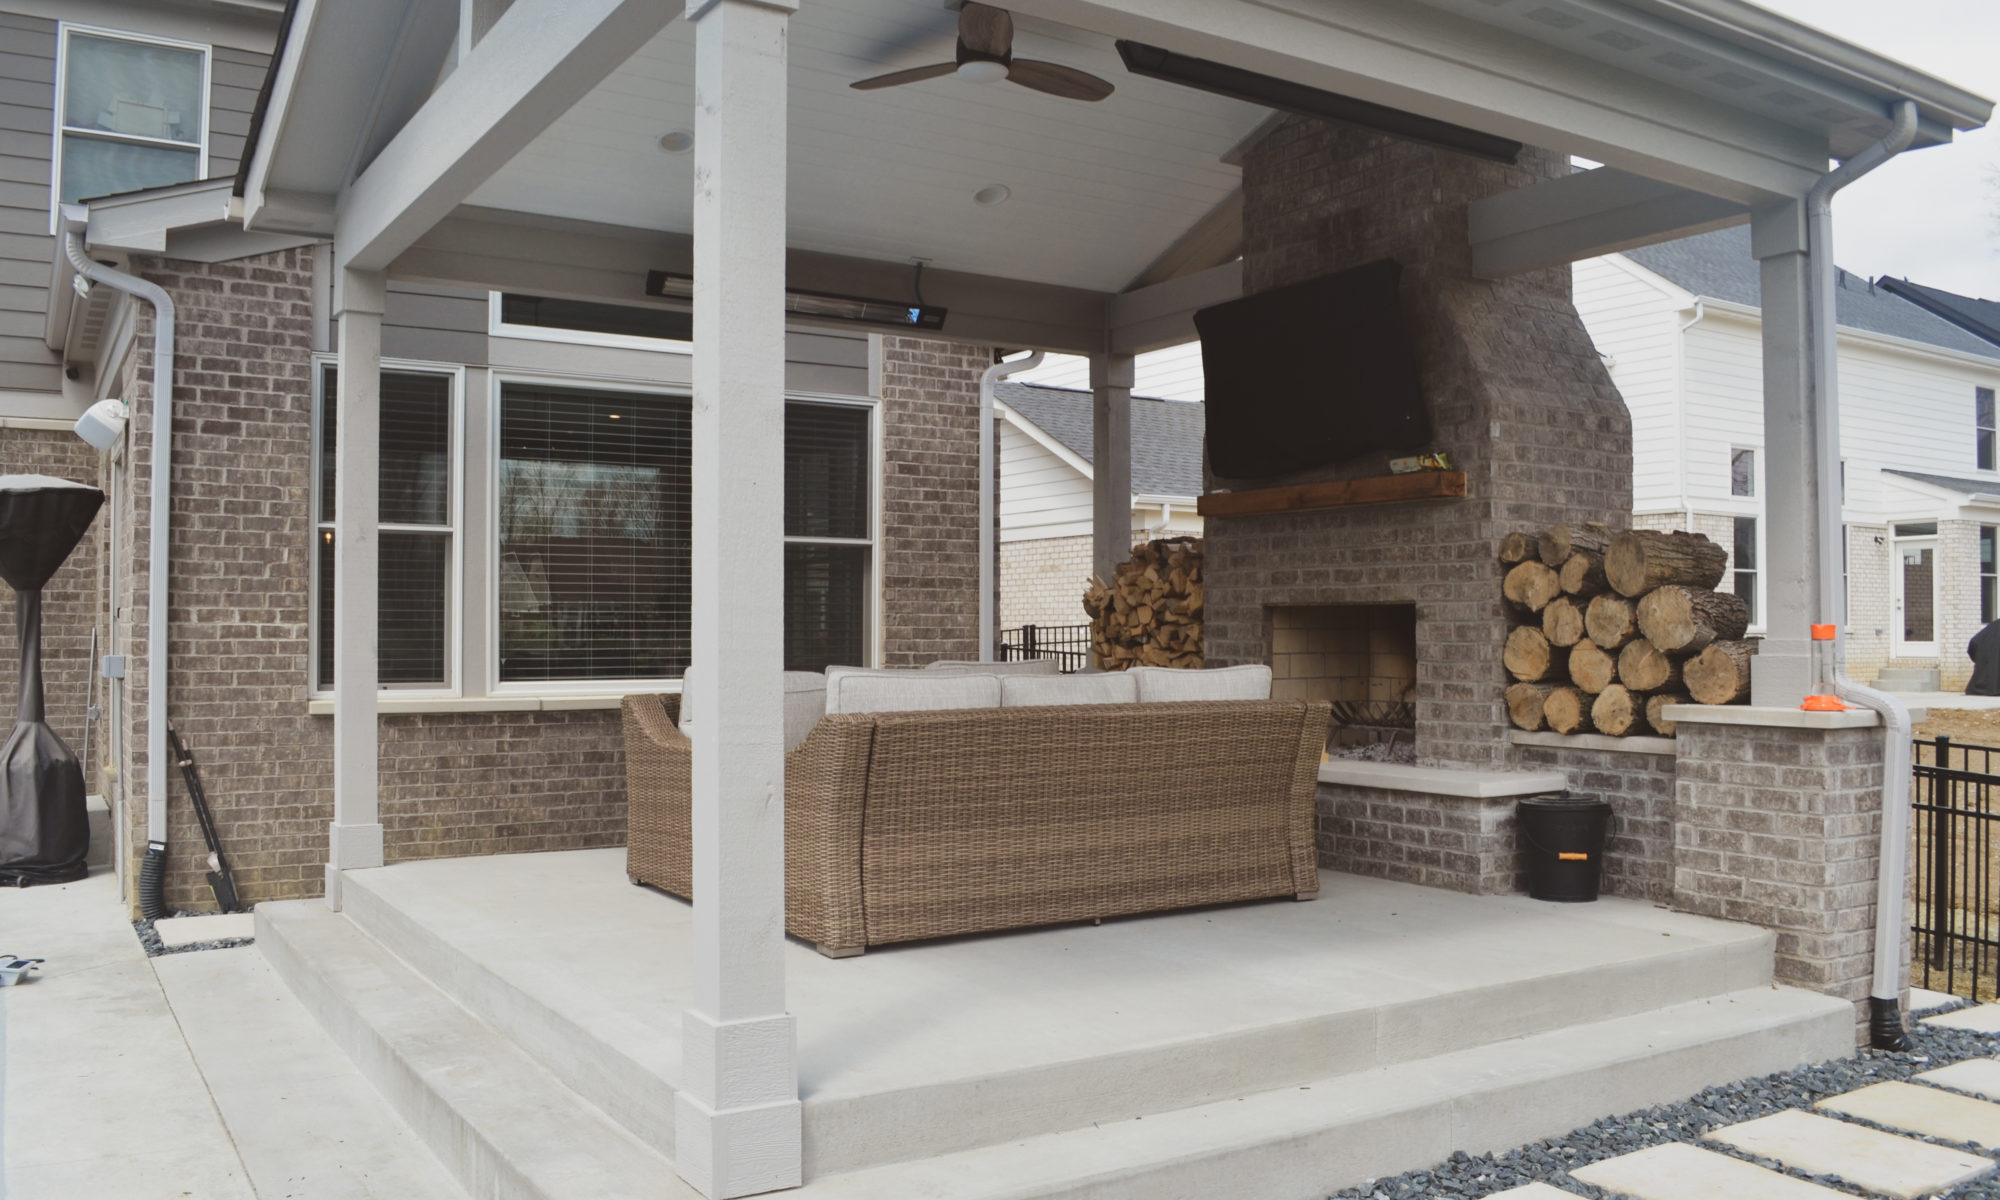 Precision Outdoors poolside at thorp creek gable roof structure fireplace fire wood storage concrete patio landscaping pool backyard summer entertaining outdoor fan heater rest and relaxation indianapolis indiana